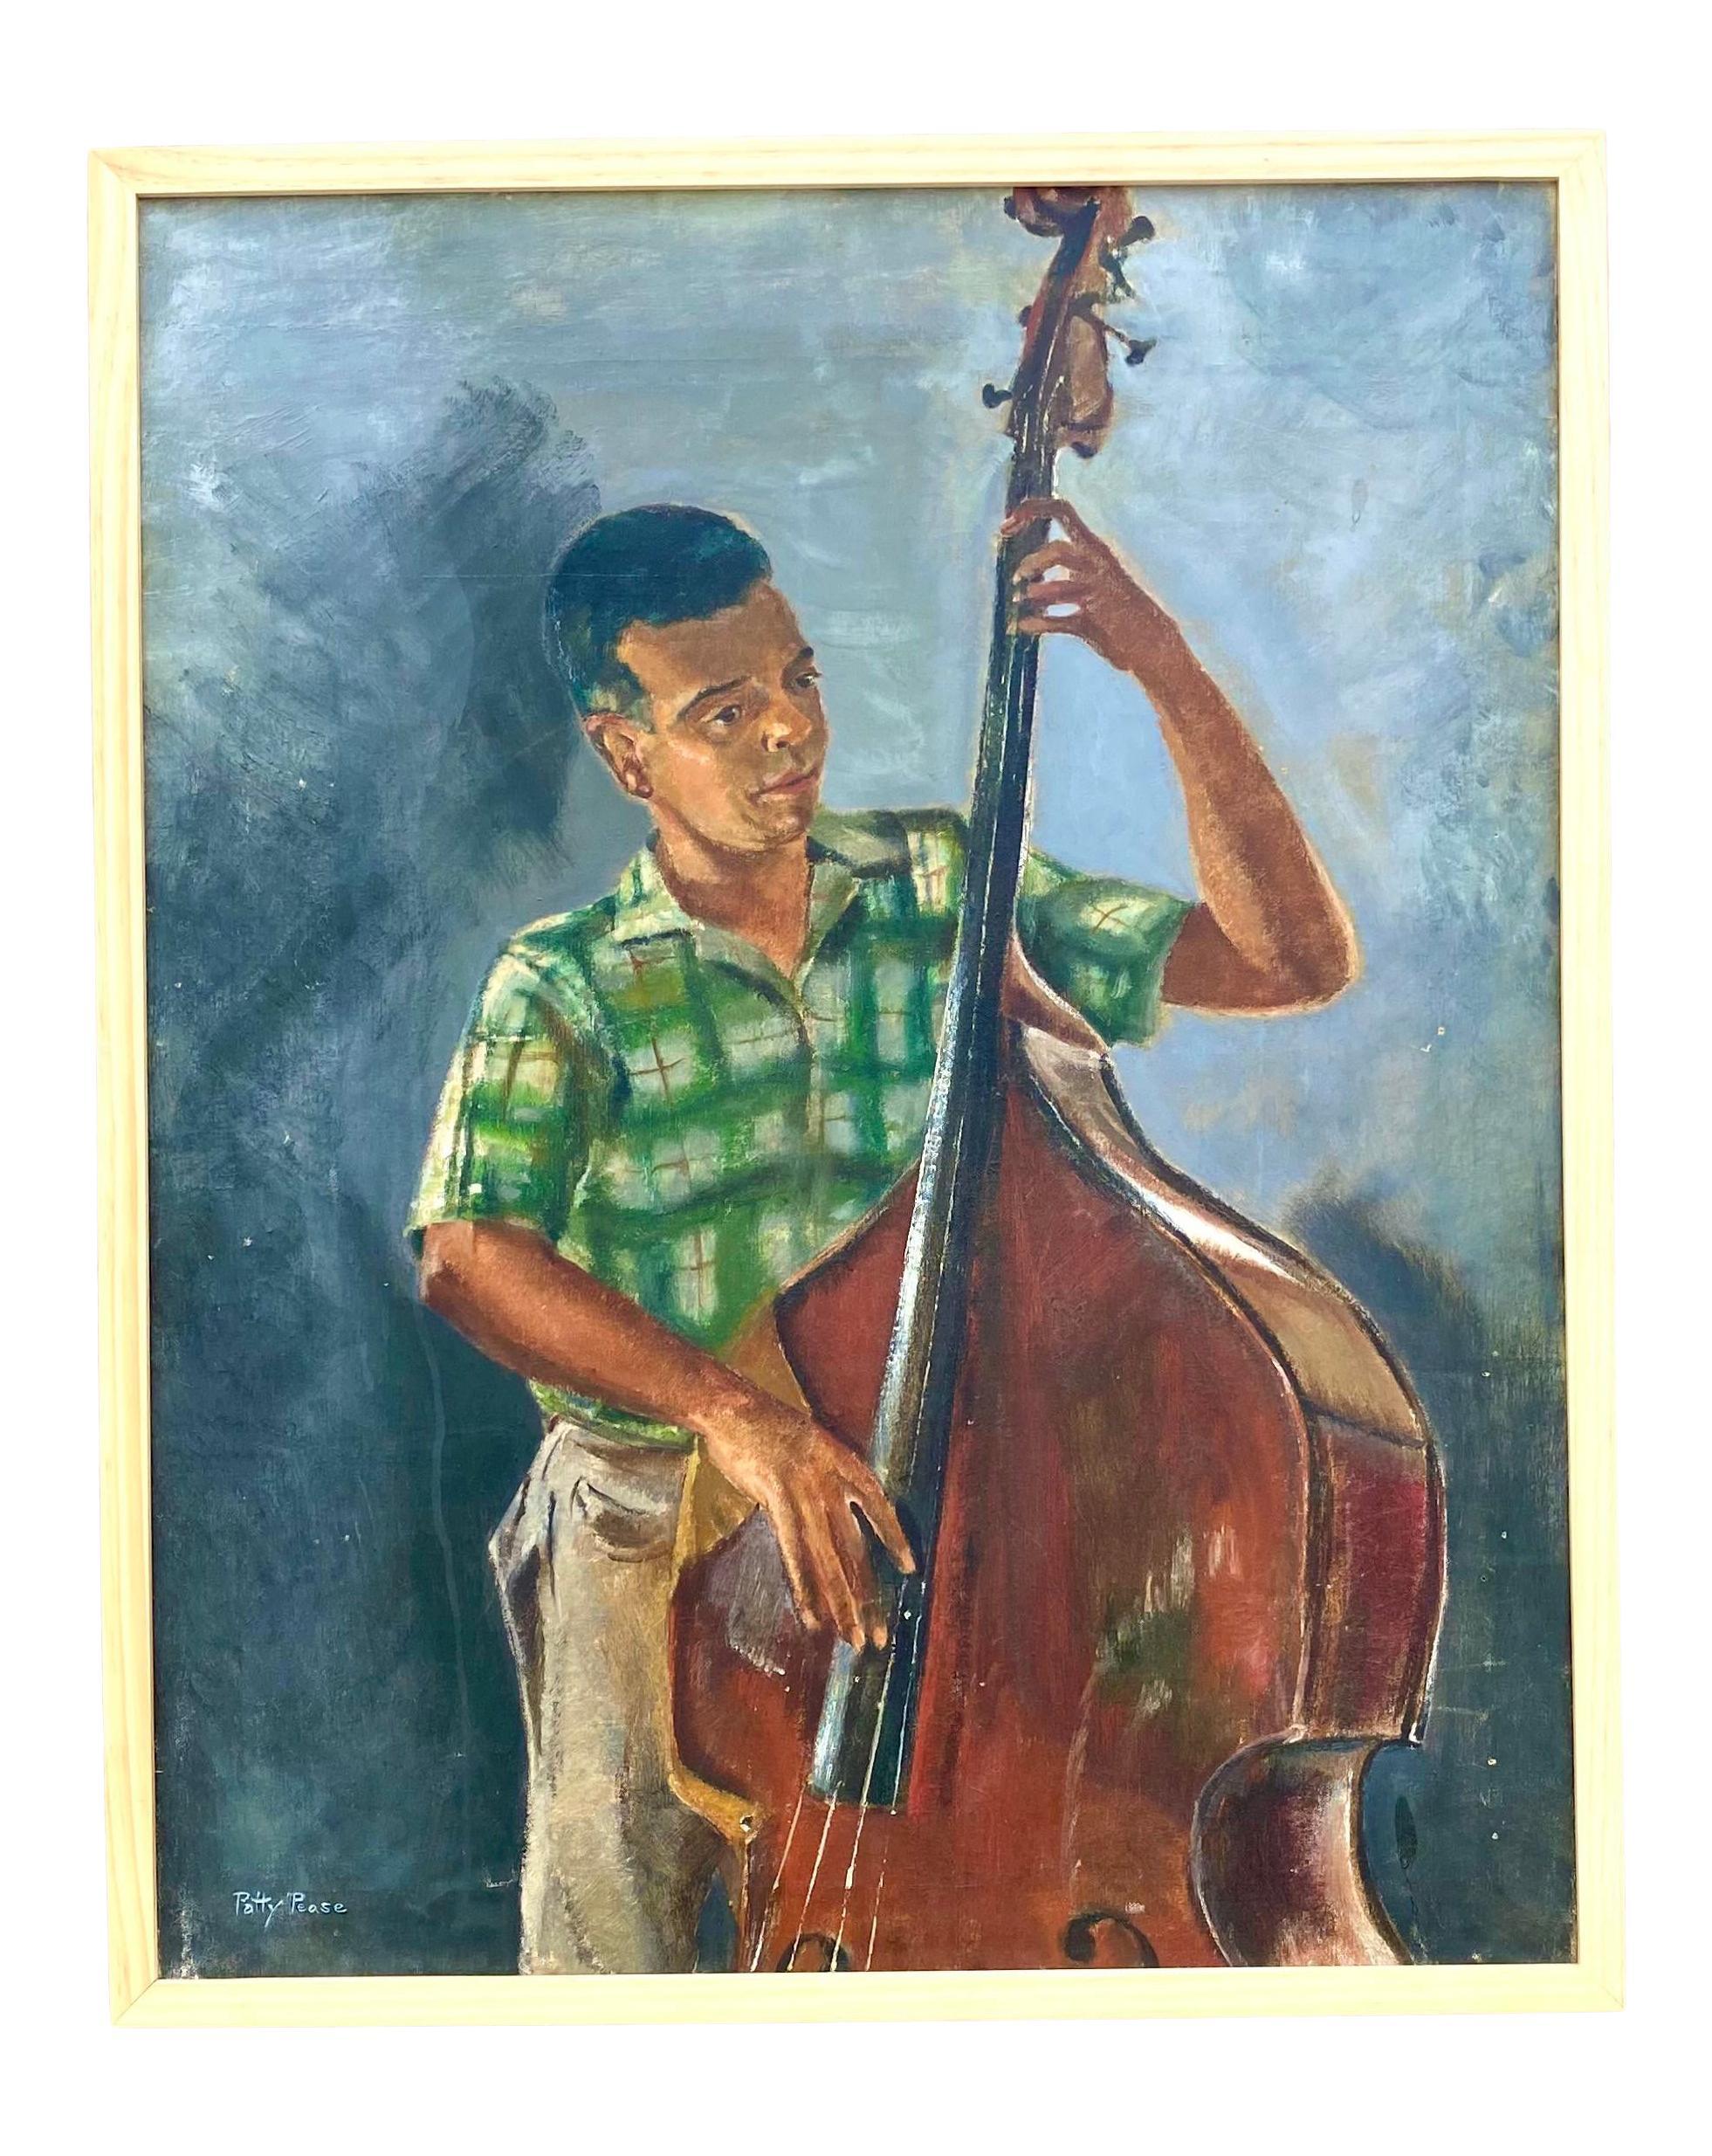 Vintage Original Oil Painting of Bass Player Signed Patty Pease For Sale